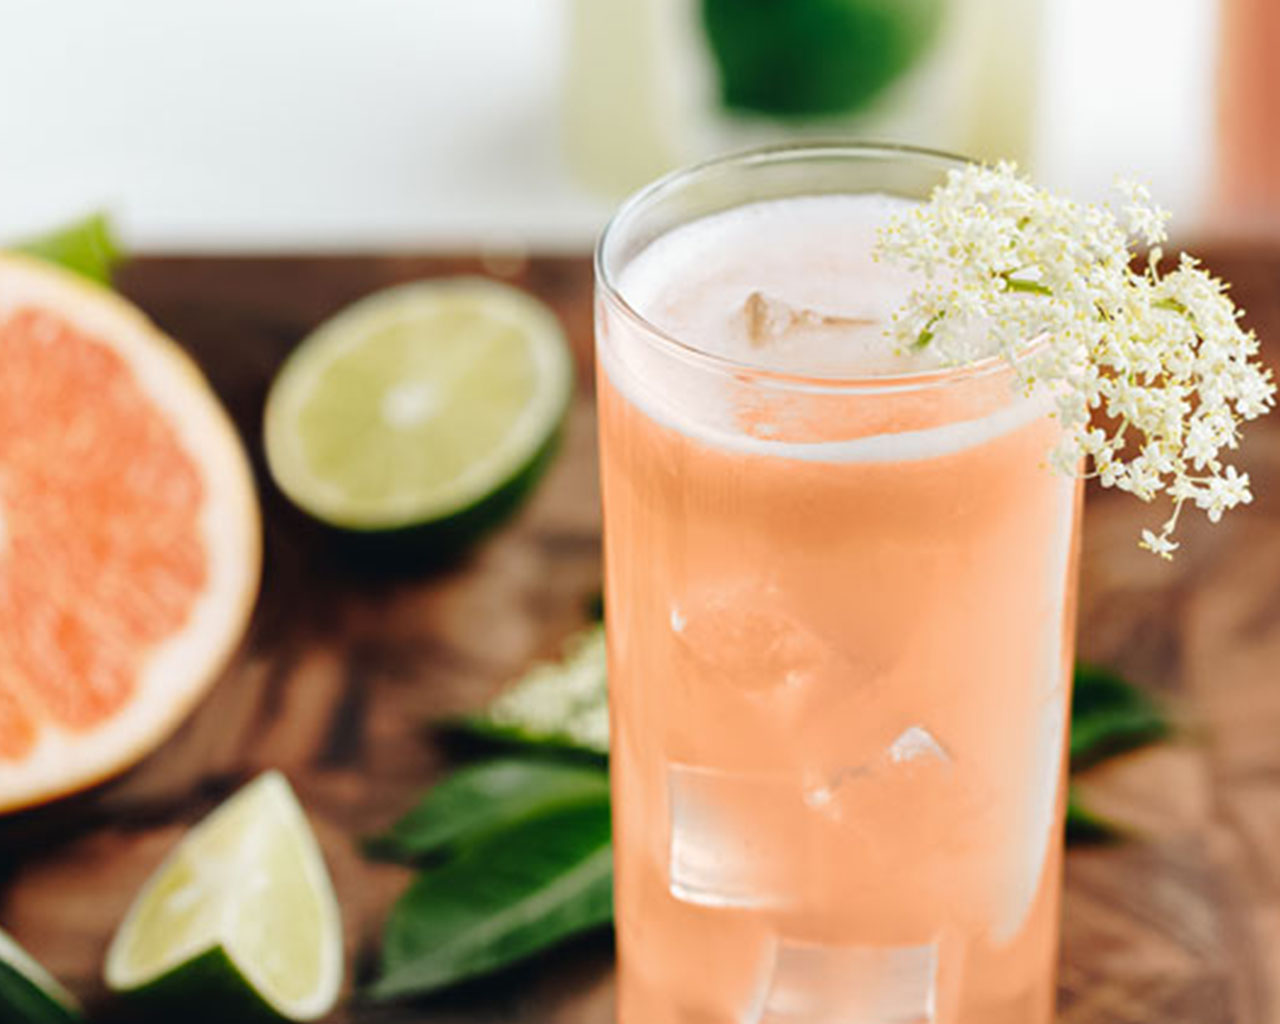 https://www.coca-cola.com/content/dam/onexp/us/en/brands/simply/recipes-and-mixology/juices-and-drinks/juice-and-drinks-lp/USA_simply_grapefruit_limeaid_elderflower_campaign_card_right_desktop_1280x1024.jpg